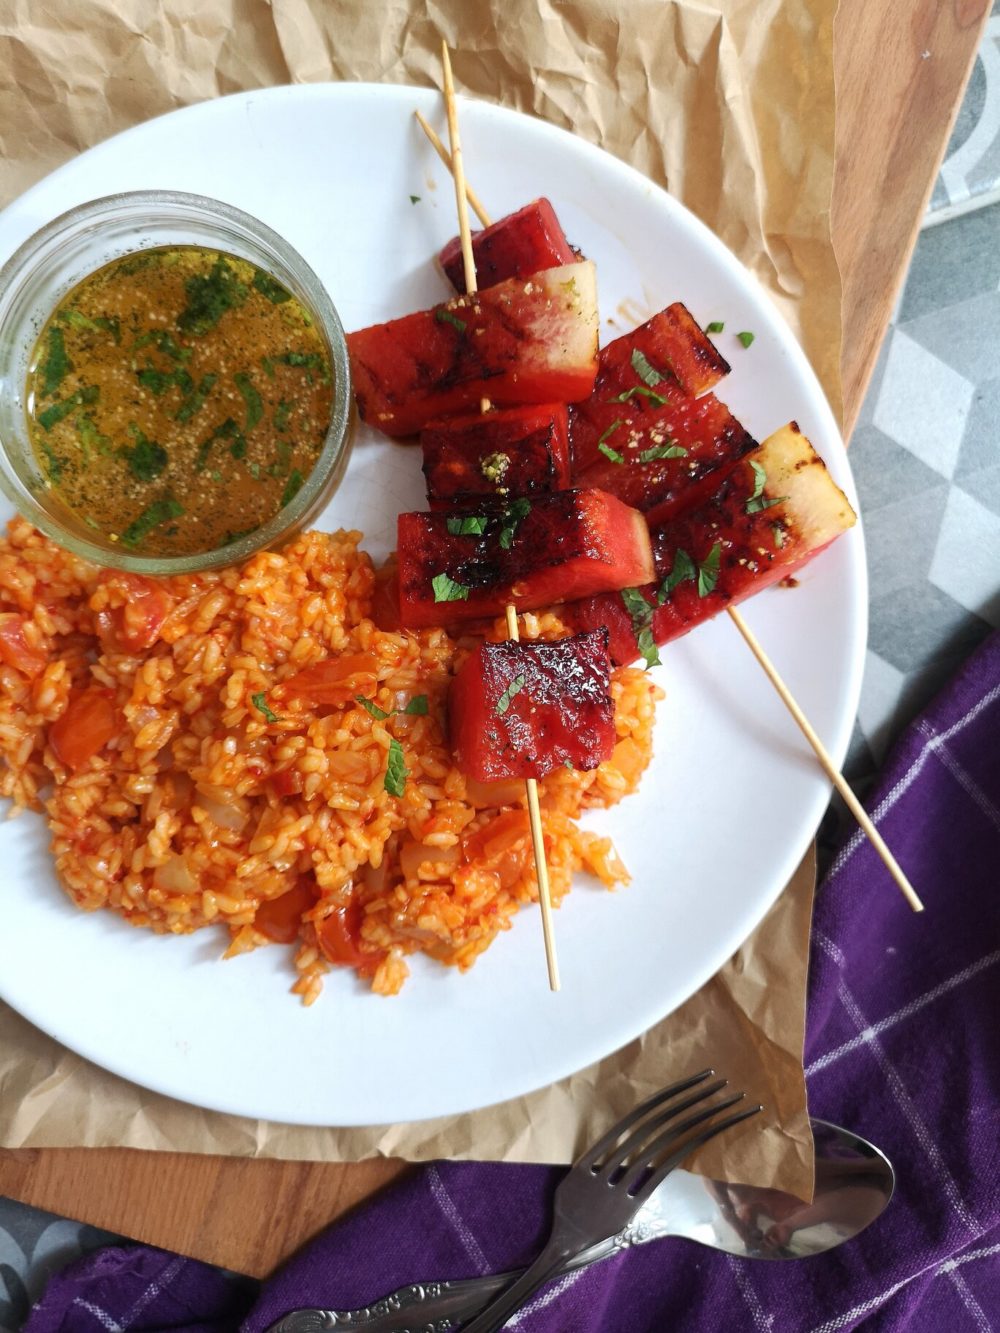 grilled watermelon and turkish rice on a white plate next to silverware